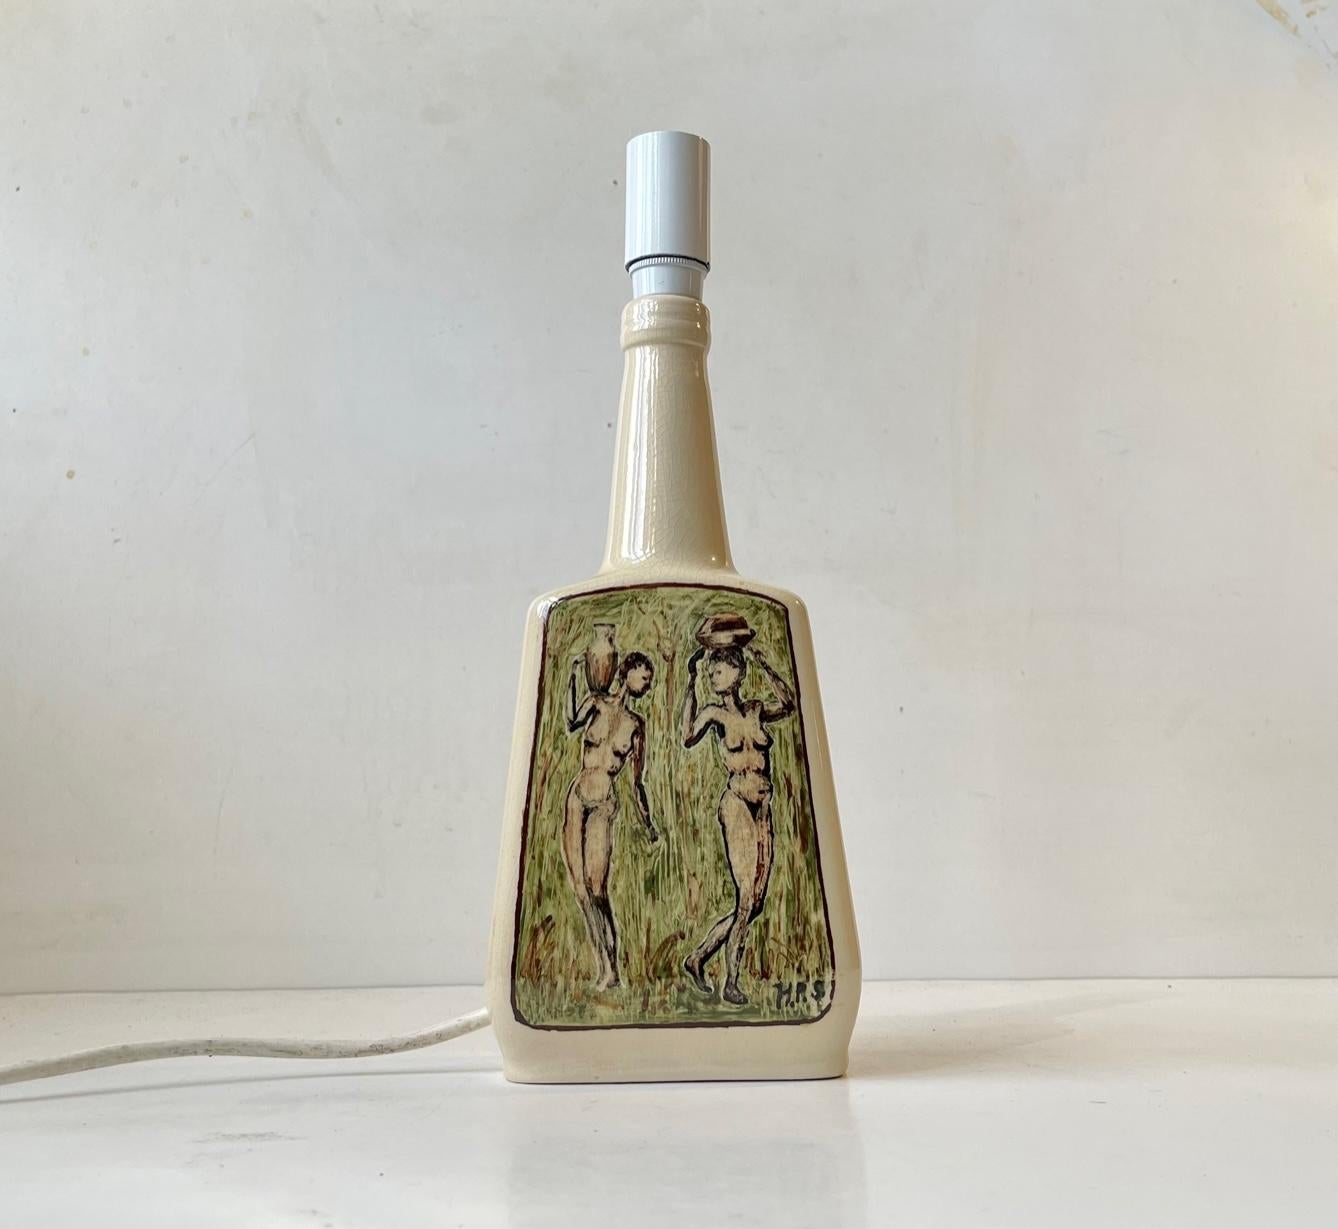 Hand-painted Ceramic Table Lamp with Naked African Woman, 1970s In Good Condition For Sale In Esbjerg, DK